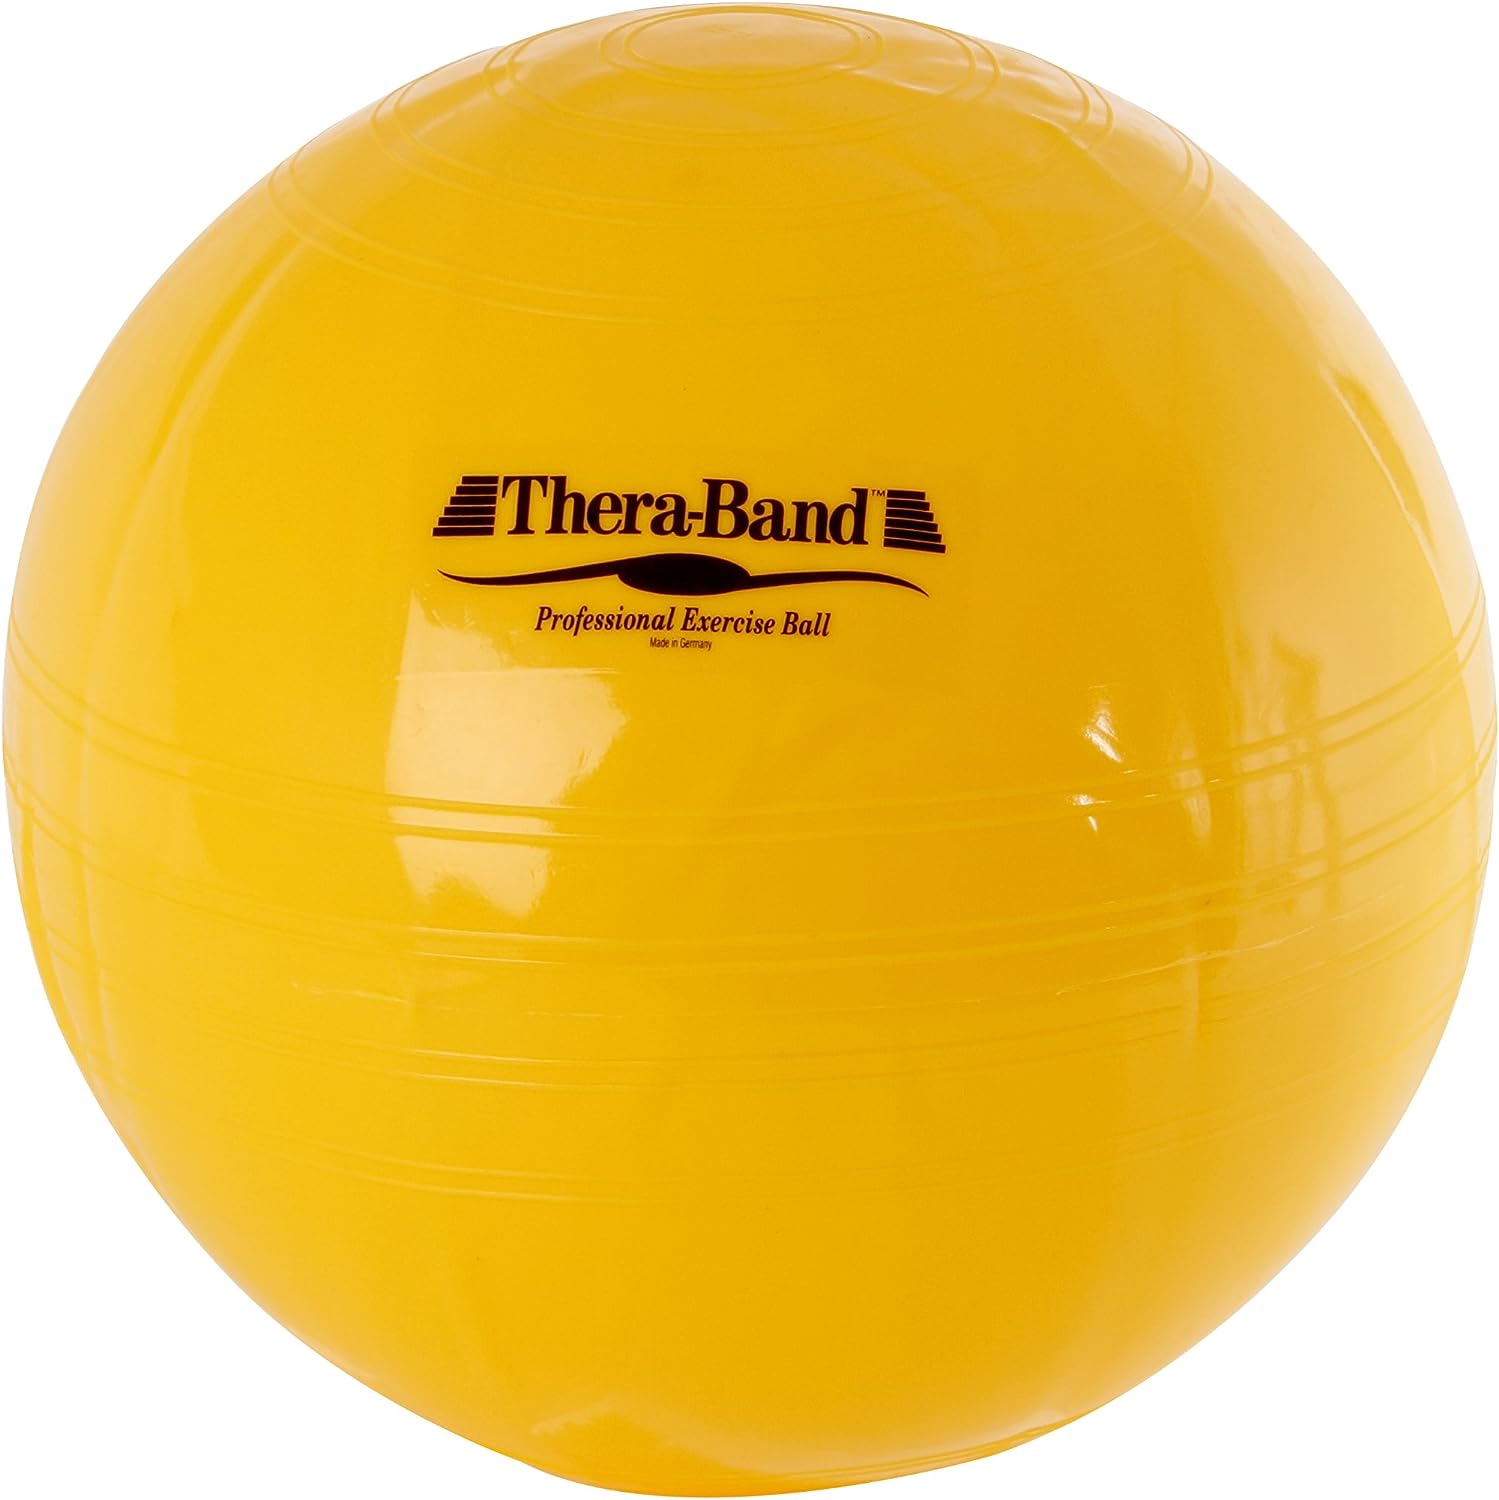 THERABAND Gym Exercise 45cm Ball for Sport Training , Yoga and Fitness, Home Gym Equipment with Inflation Adaptor, Yellow